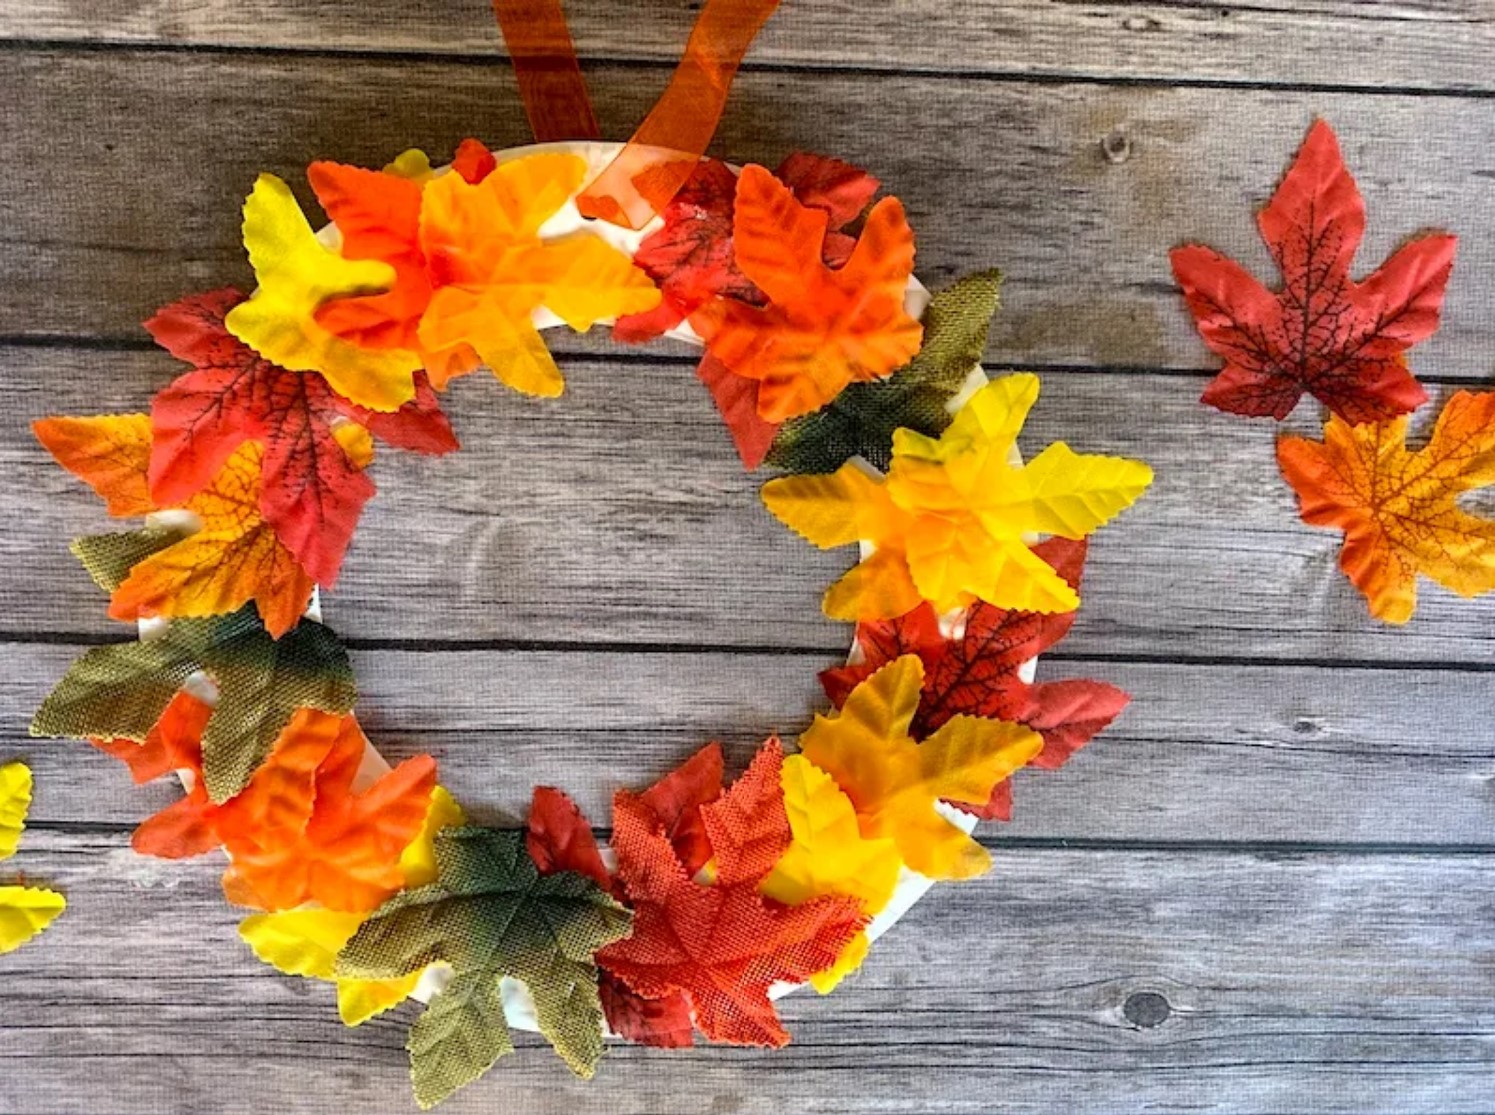 Wreath of yellow, green, red, and orange leaves on a wood background in honor of Fall.